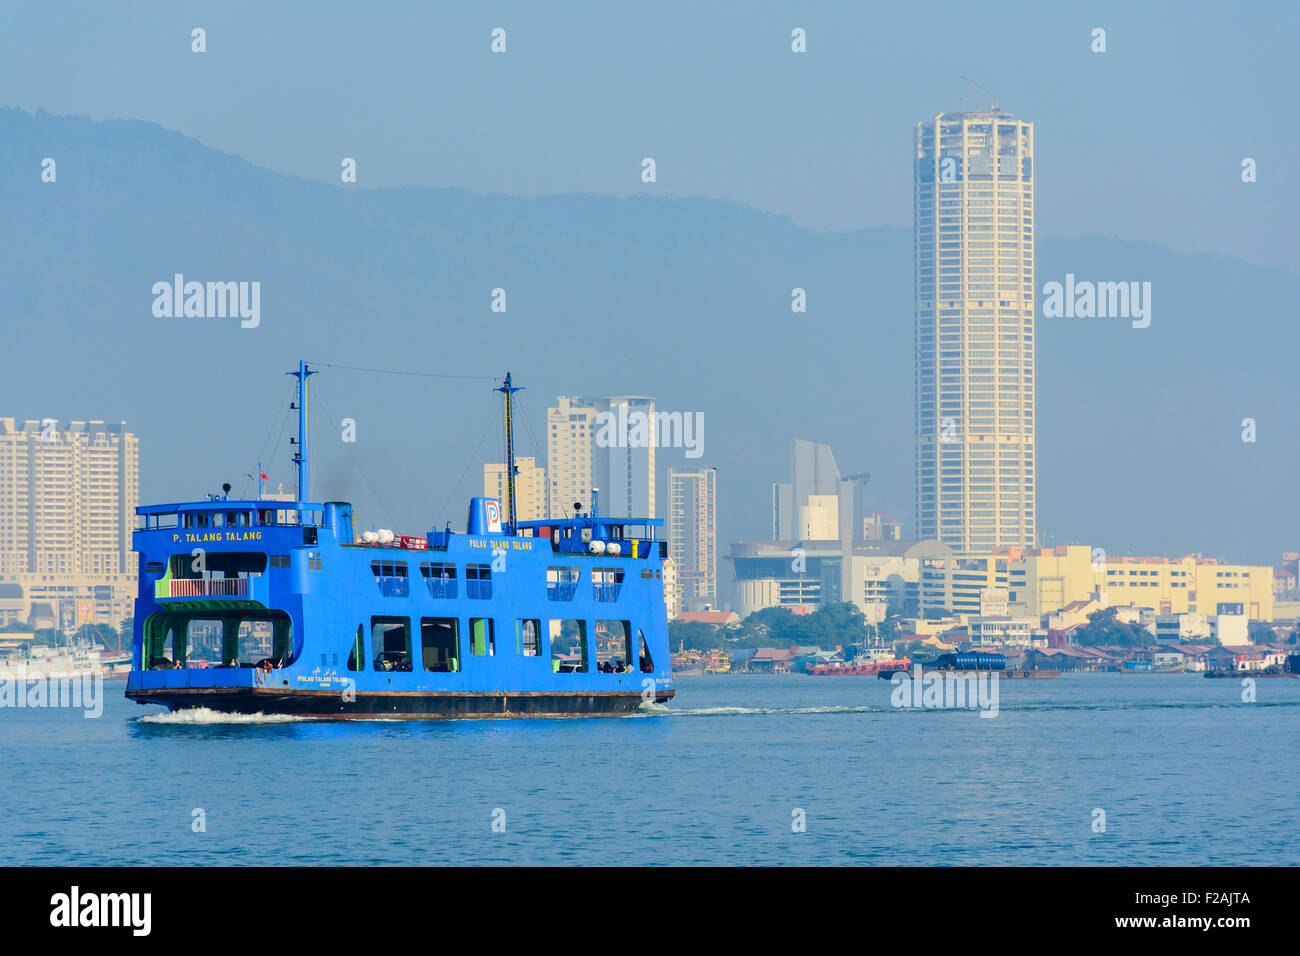 Ferry and KOMTAR Tower of Penang Stock Photo